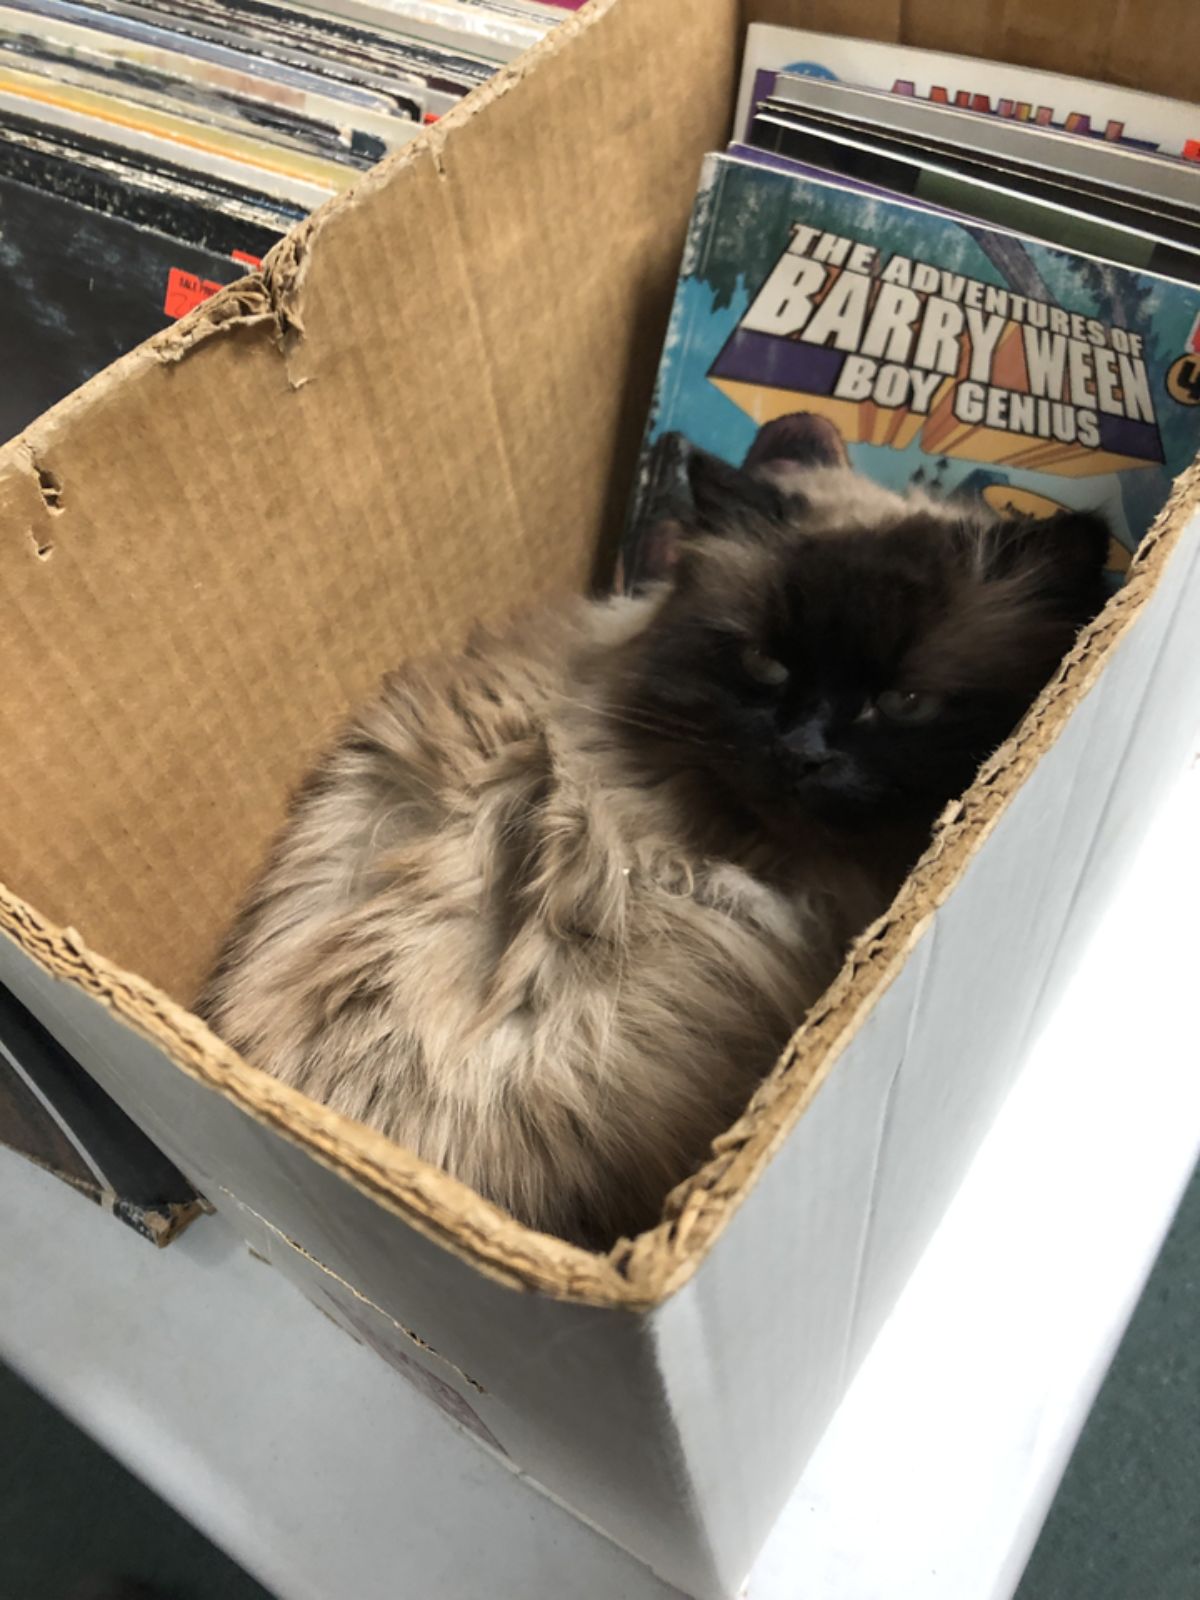 grey and black cat laying in a cardboard box with books in it